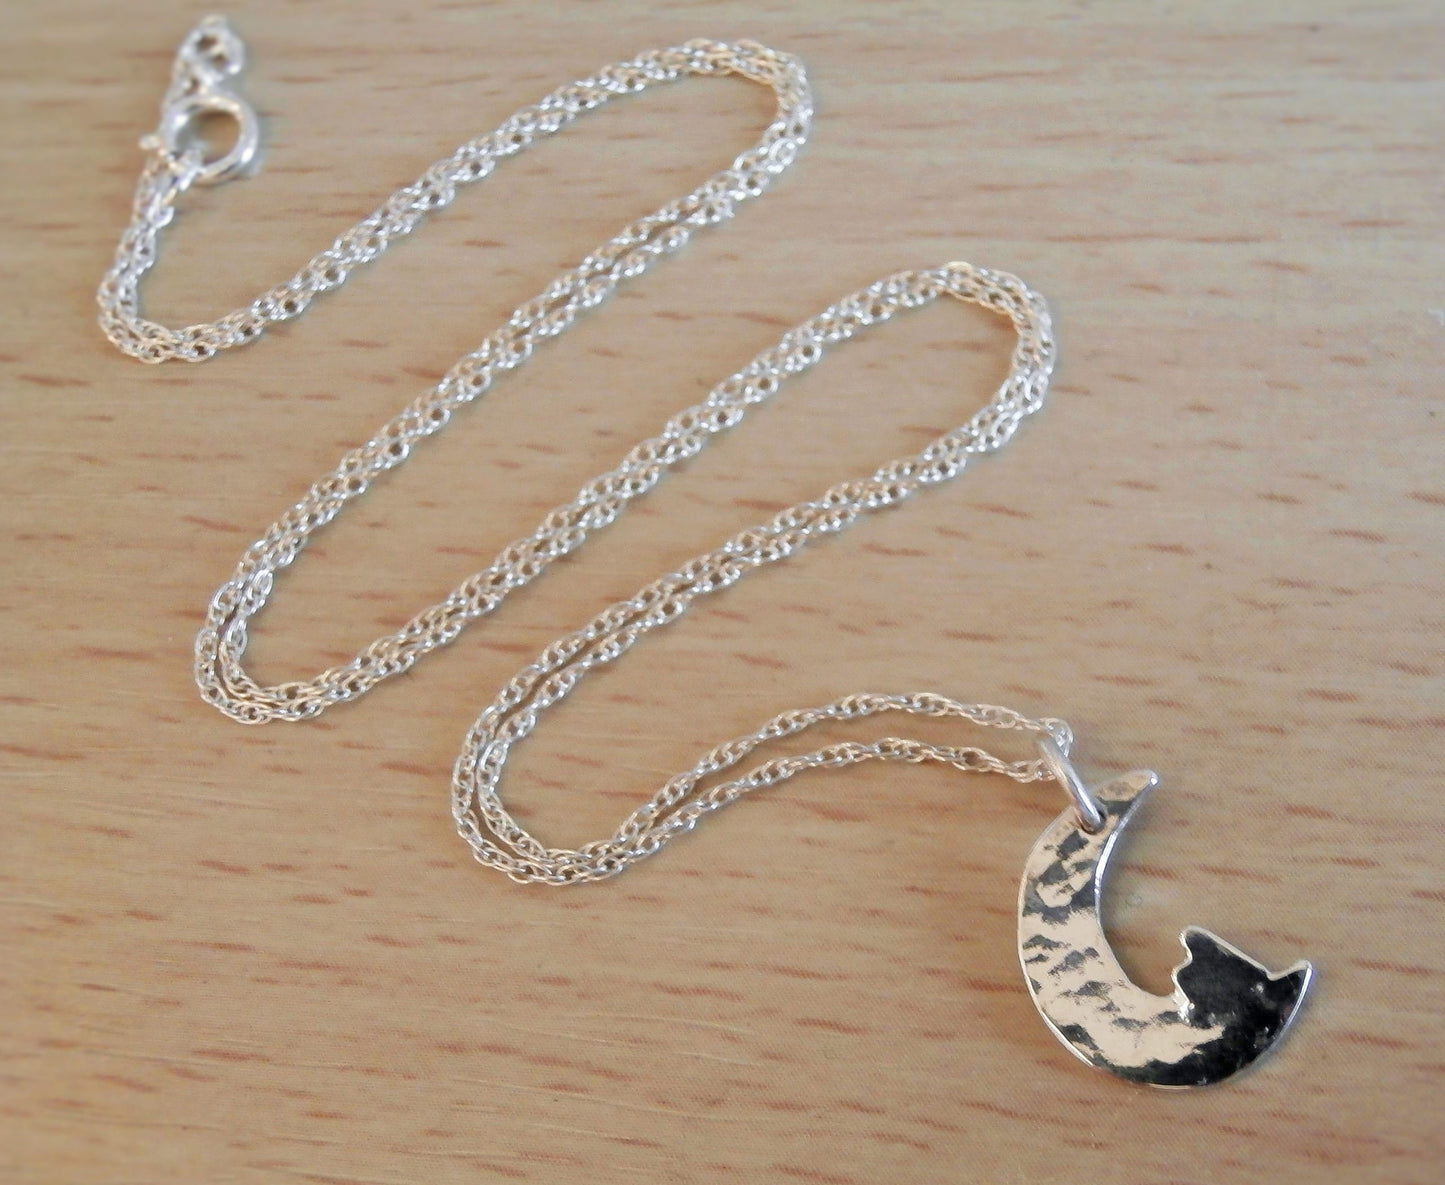 ‘Love you to the moon’ pendant